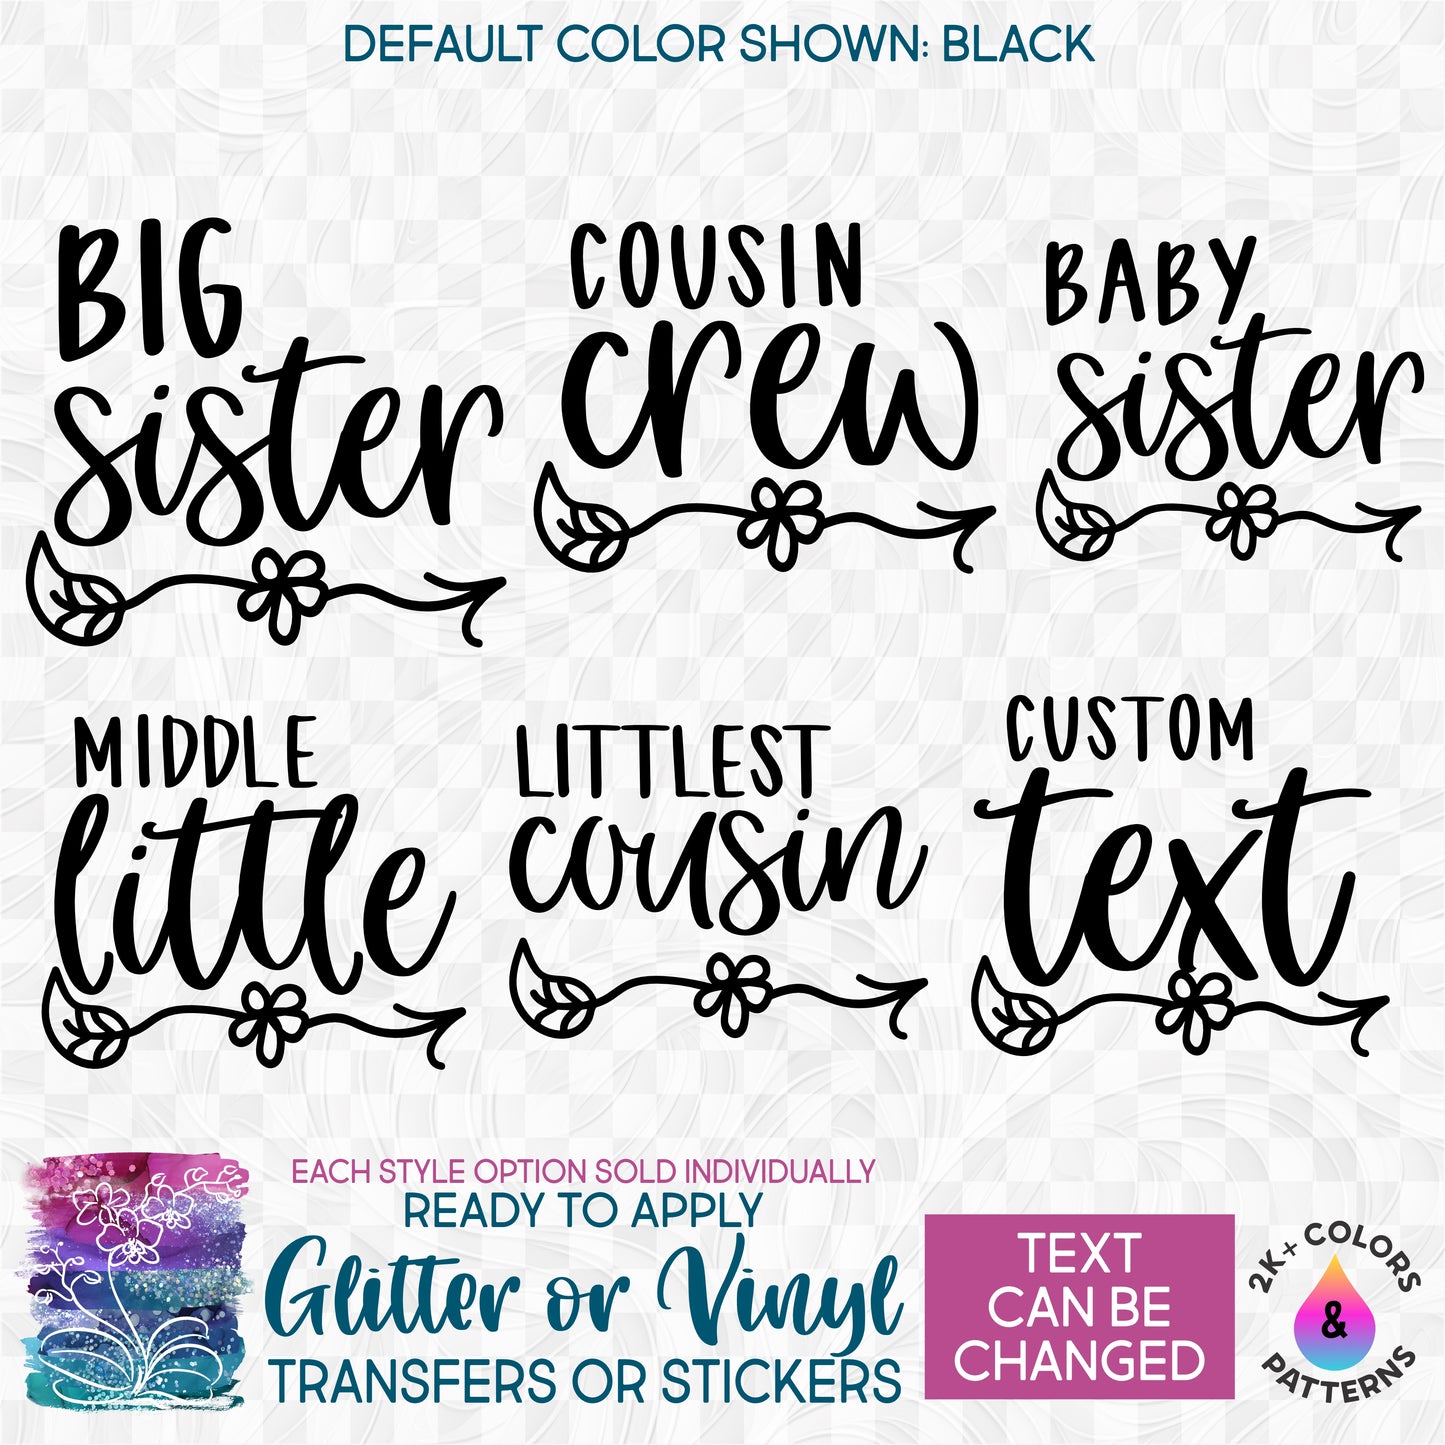 s122-Z Big Little Middle Baby Sister Cousin Crew Flower Arrow Custom Printed Iron On Transfer or Sticker